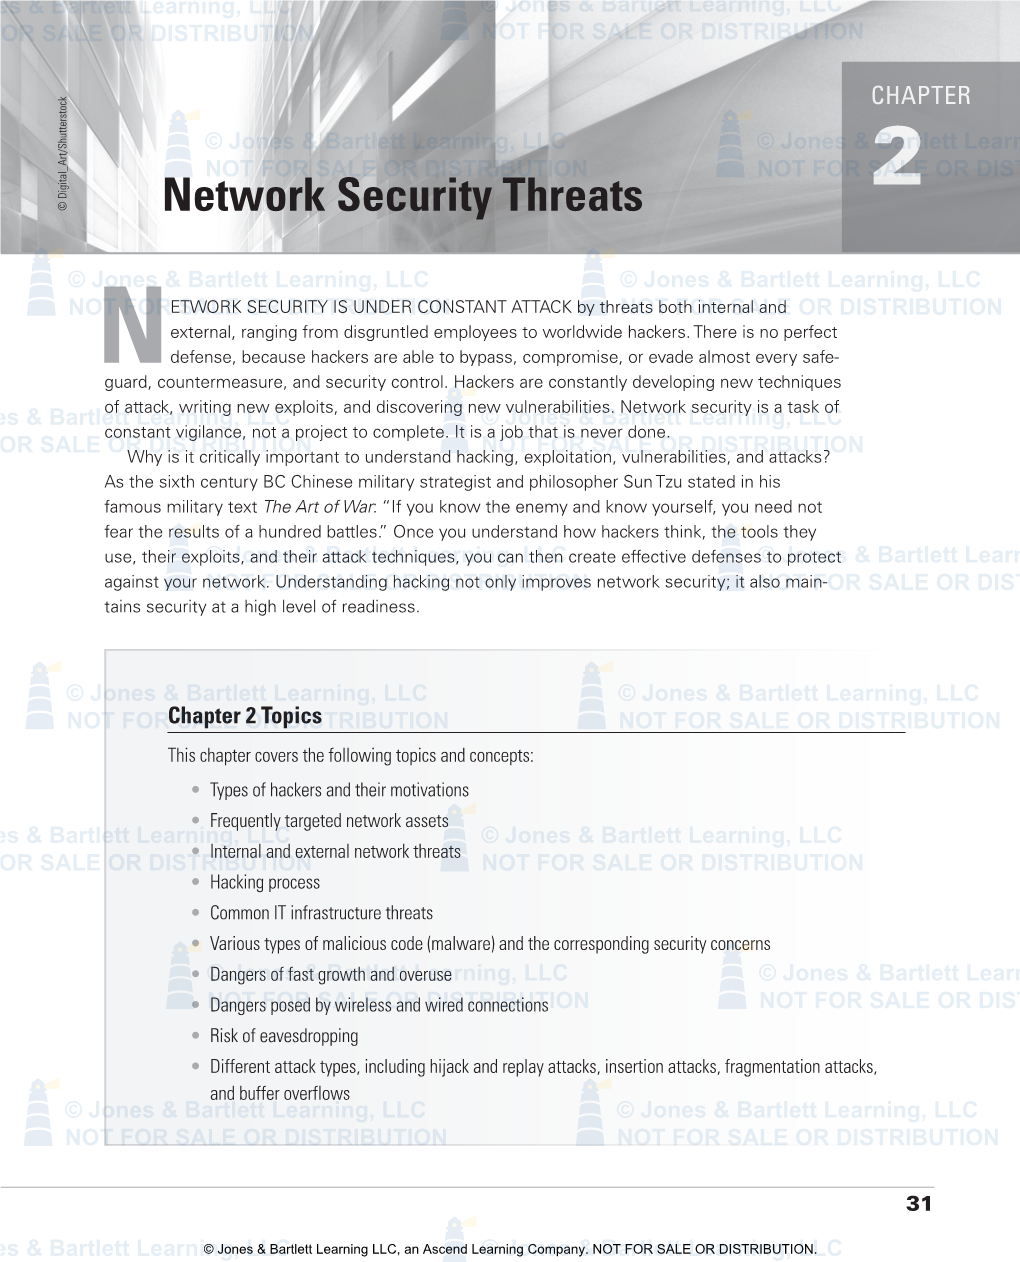 Network Security Threats